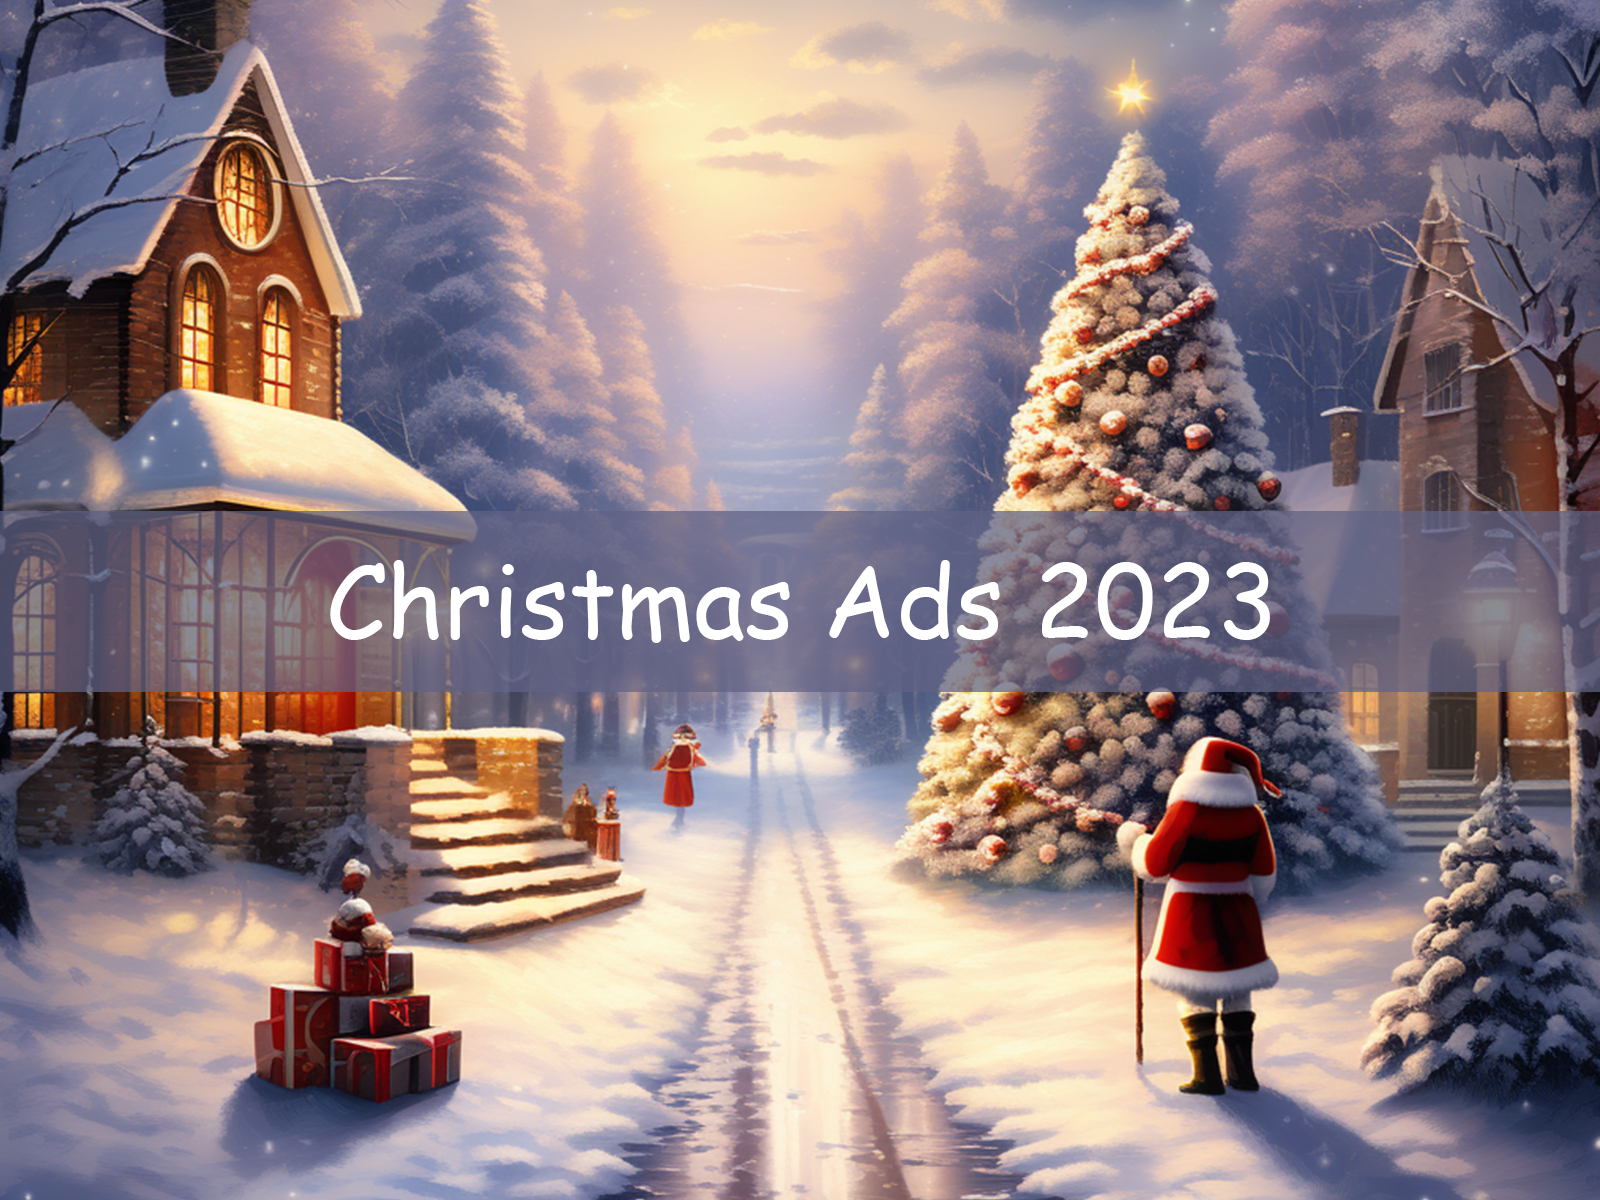 A collection of Christmas Ads 2023